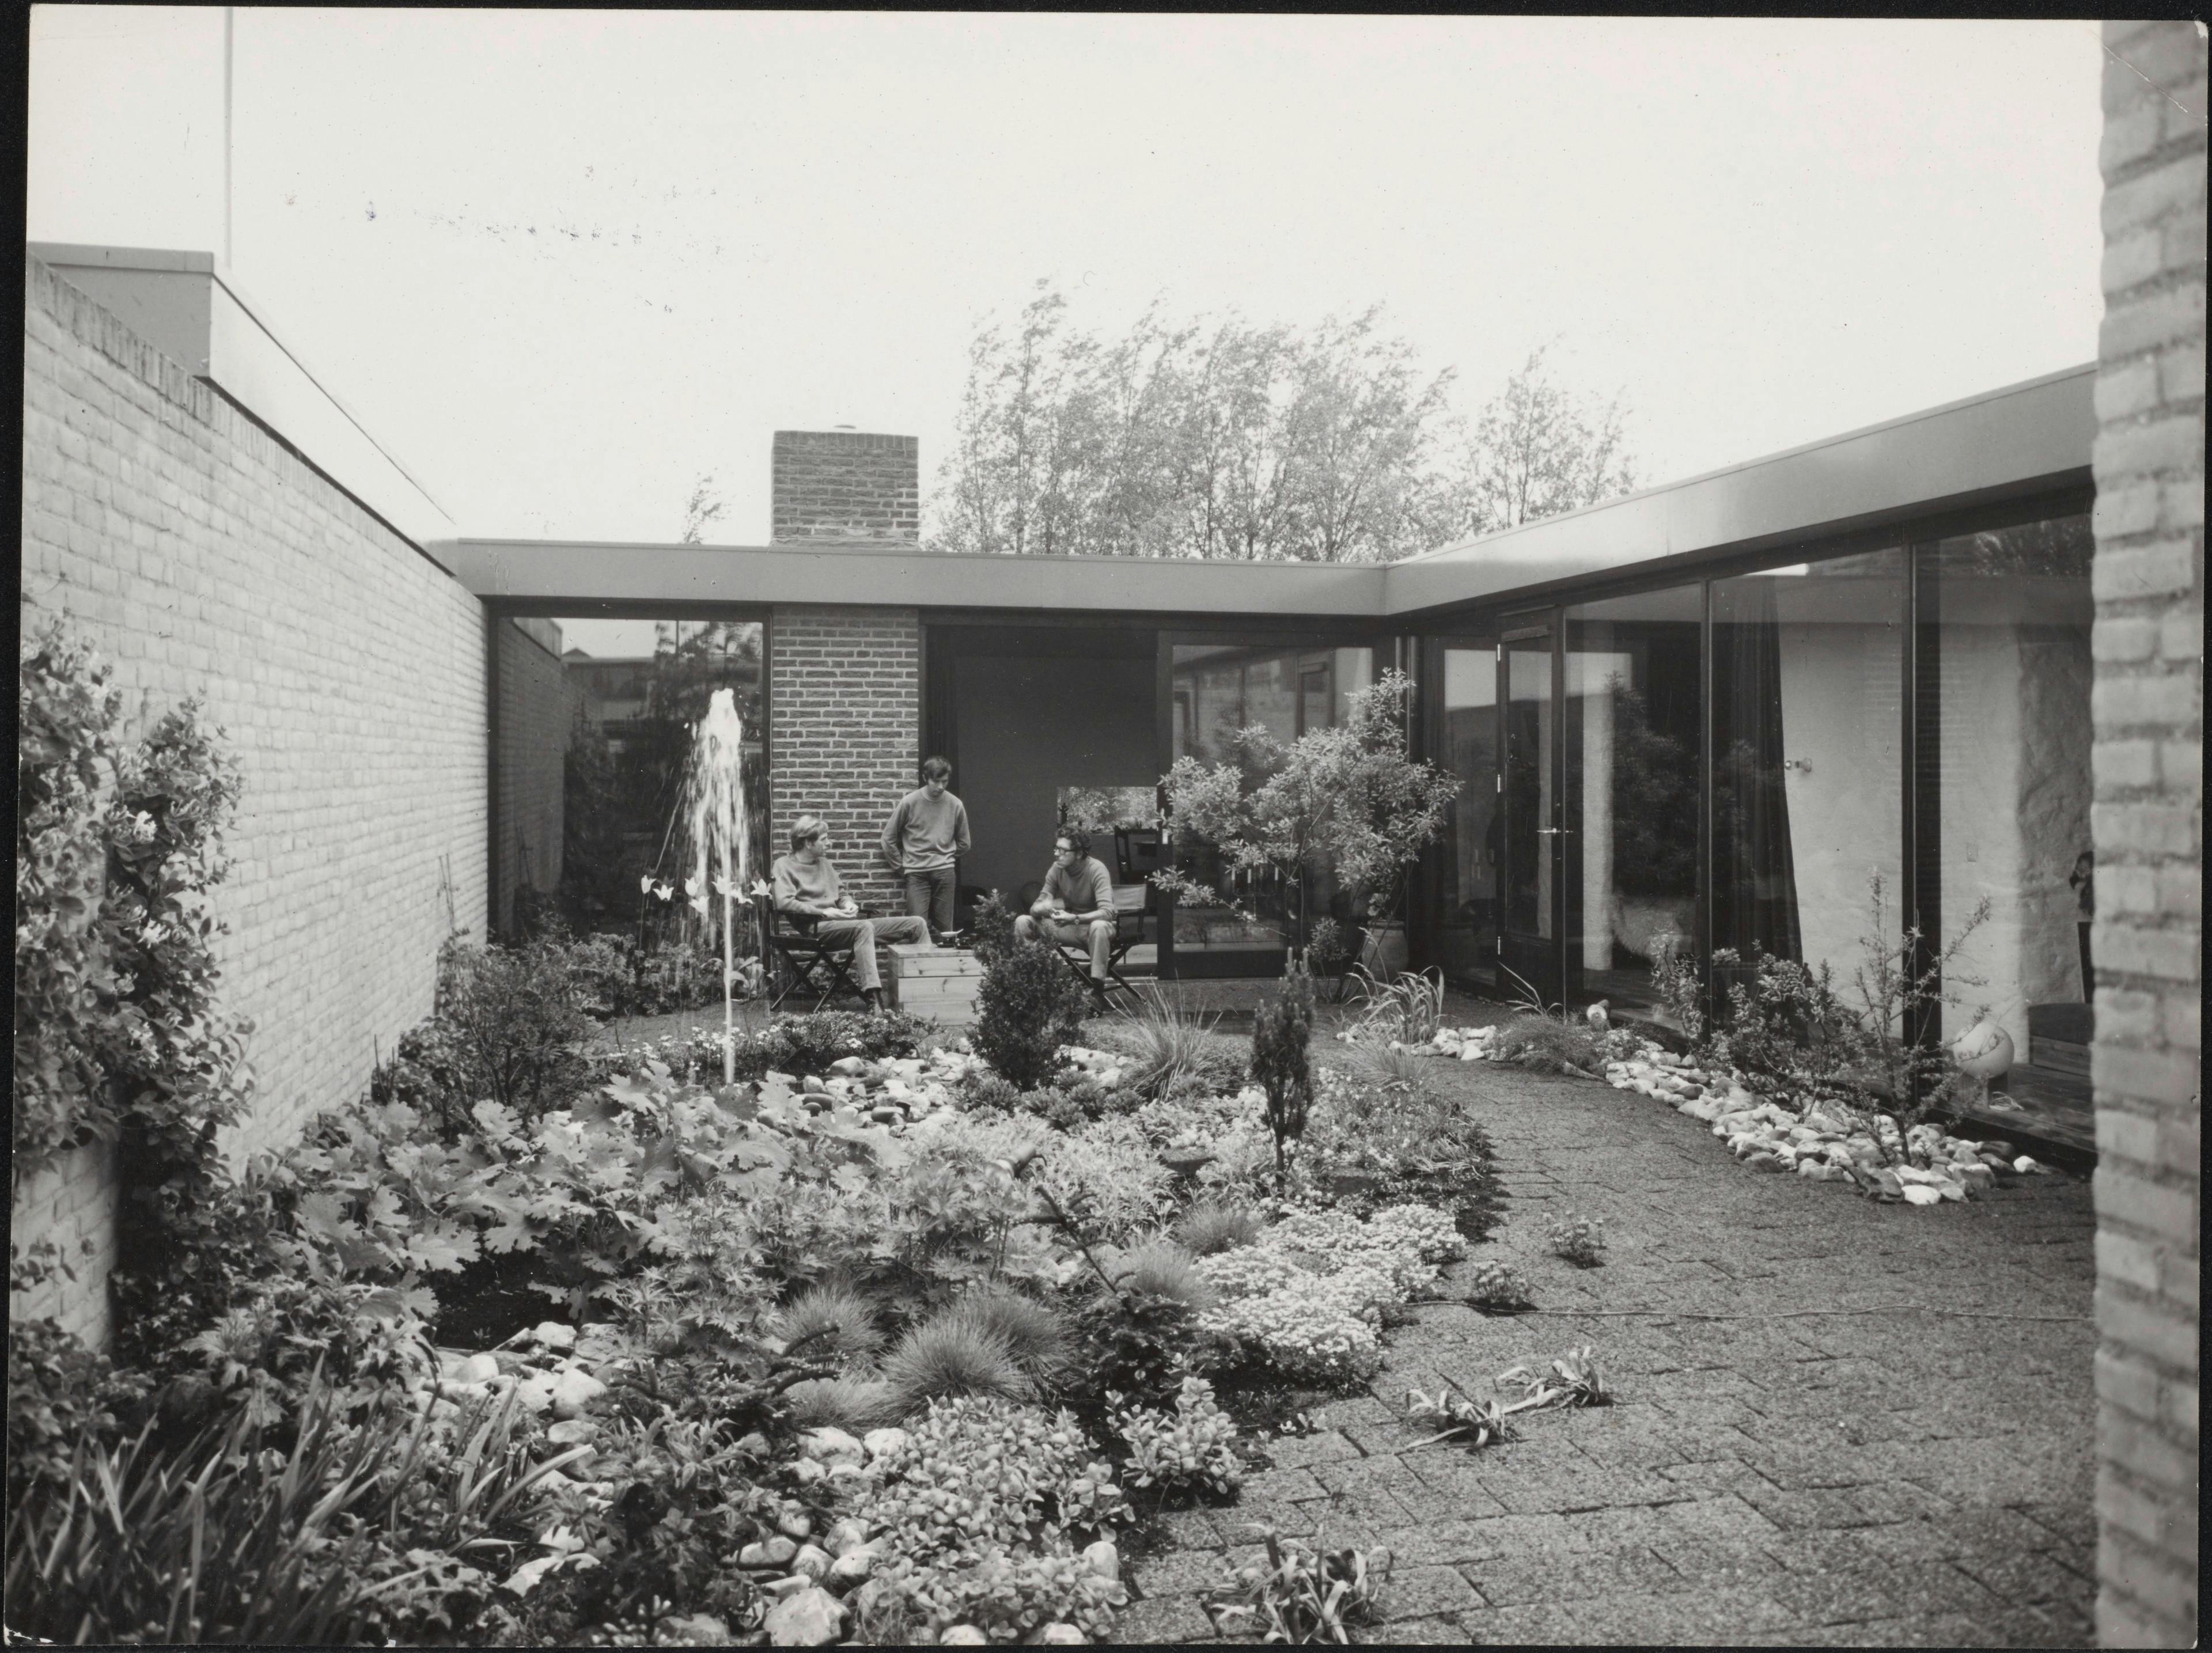 Onno Greiner. Patio houses Laan Rozenburg in Amstelveen, 1961-1966. Within this series, Greiner also designed his own home. Text on back of photo: 'Our own garden'. Photo Studio Hartland. Collection Nieuwe Instituut, GREO 61018f1-54a.